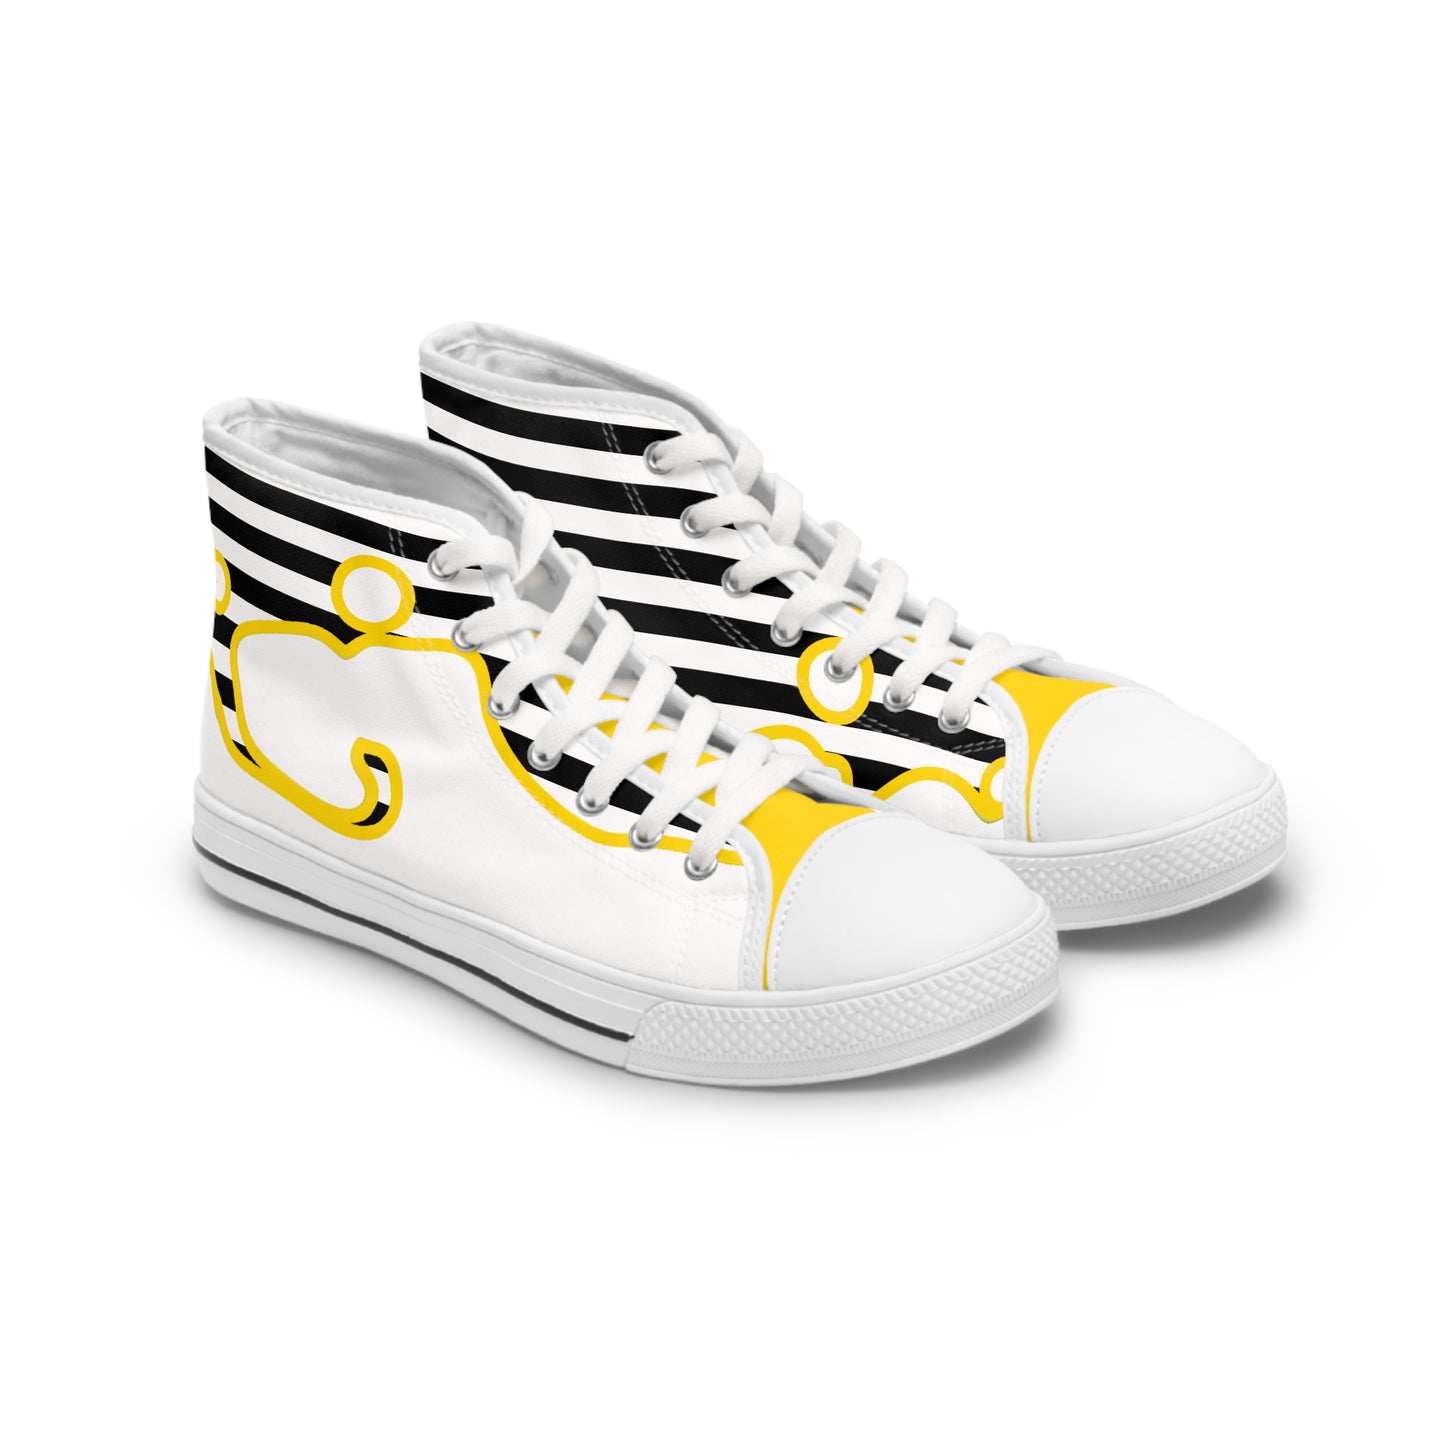 Women's High Top Graphics Sneakers - 10002 US 12 White sole